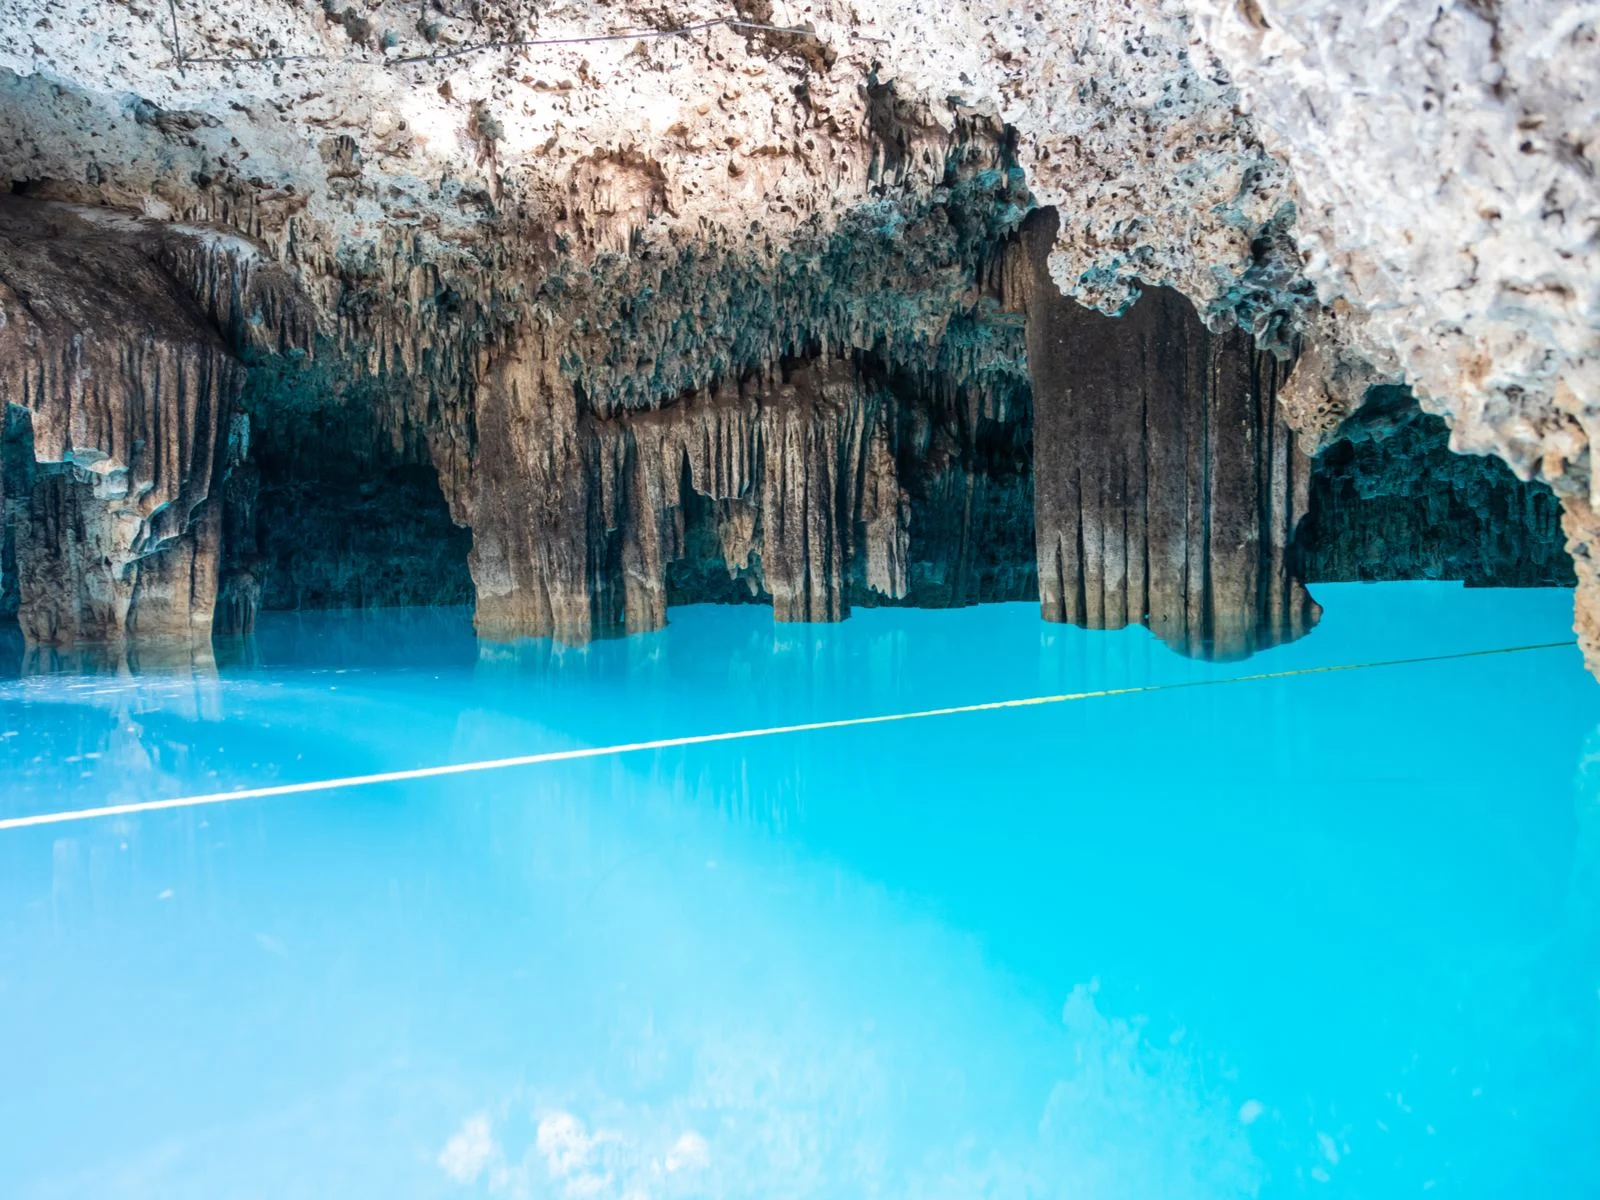 Cenote Siete Bocas, one of Mexico's best cenotes, pictured with neon blue water below rocks